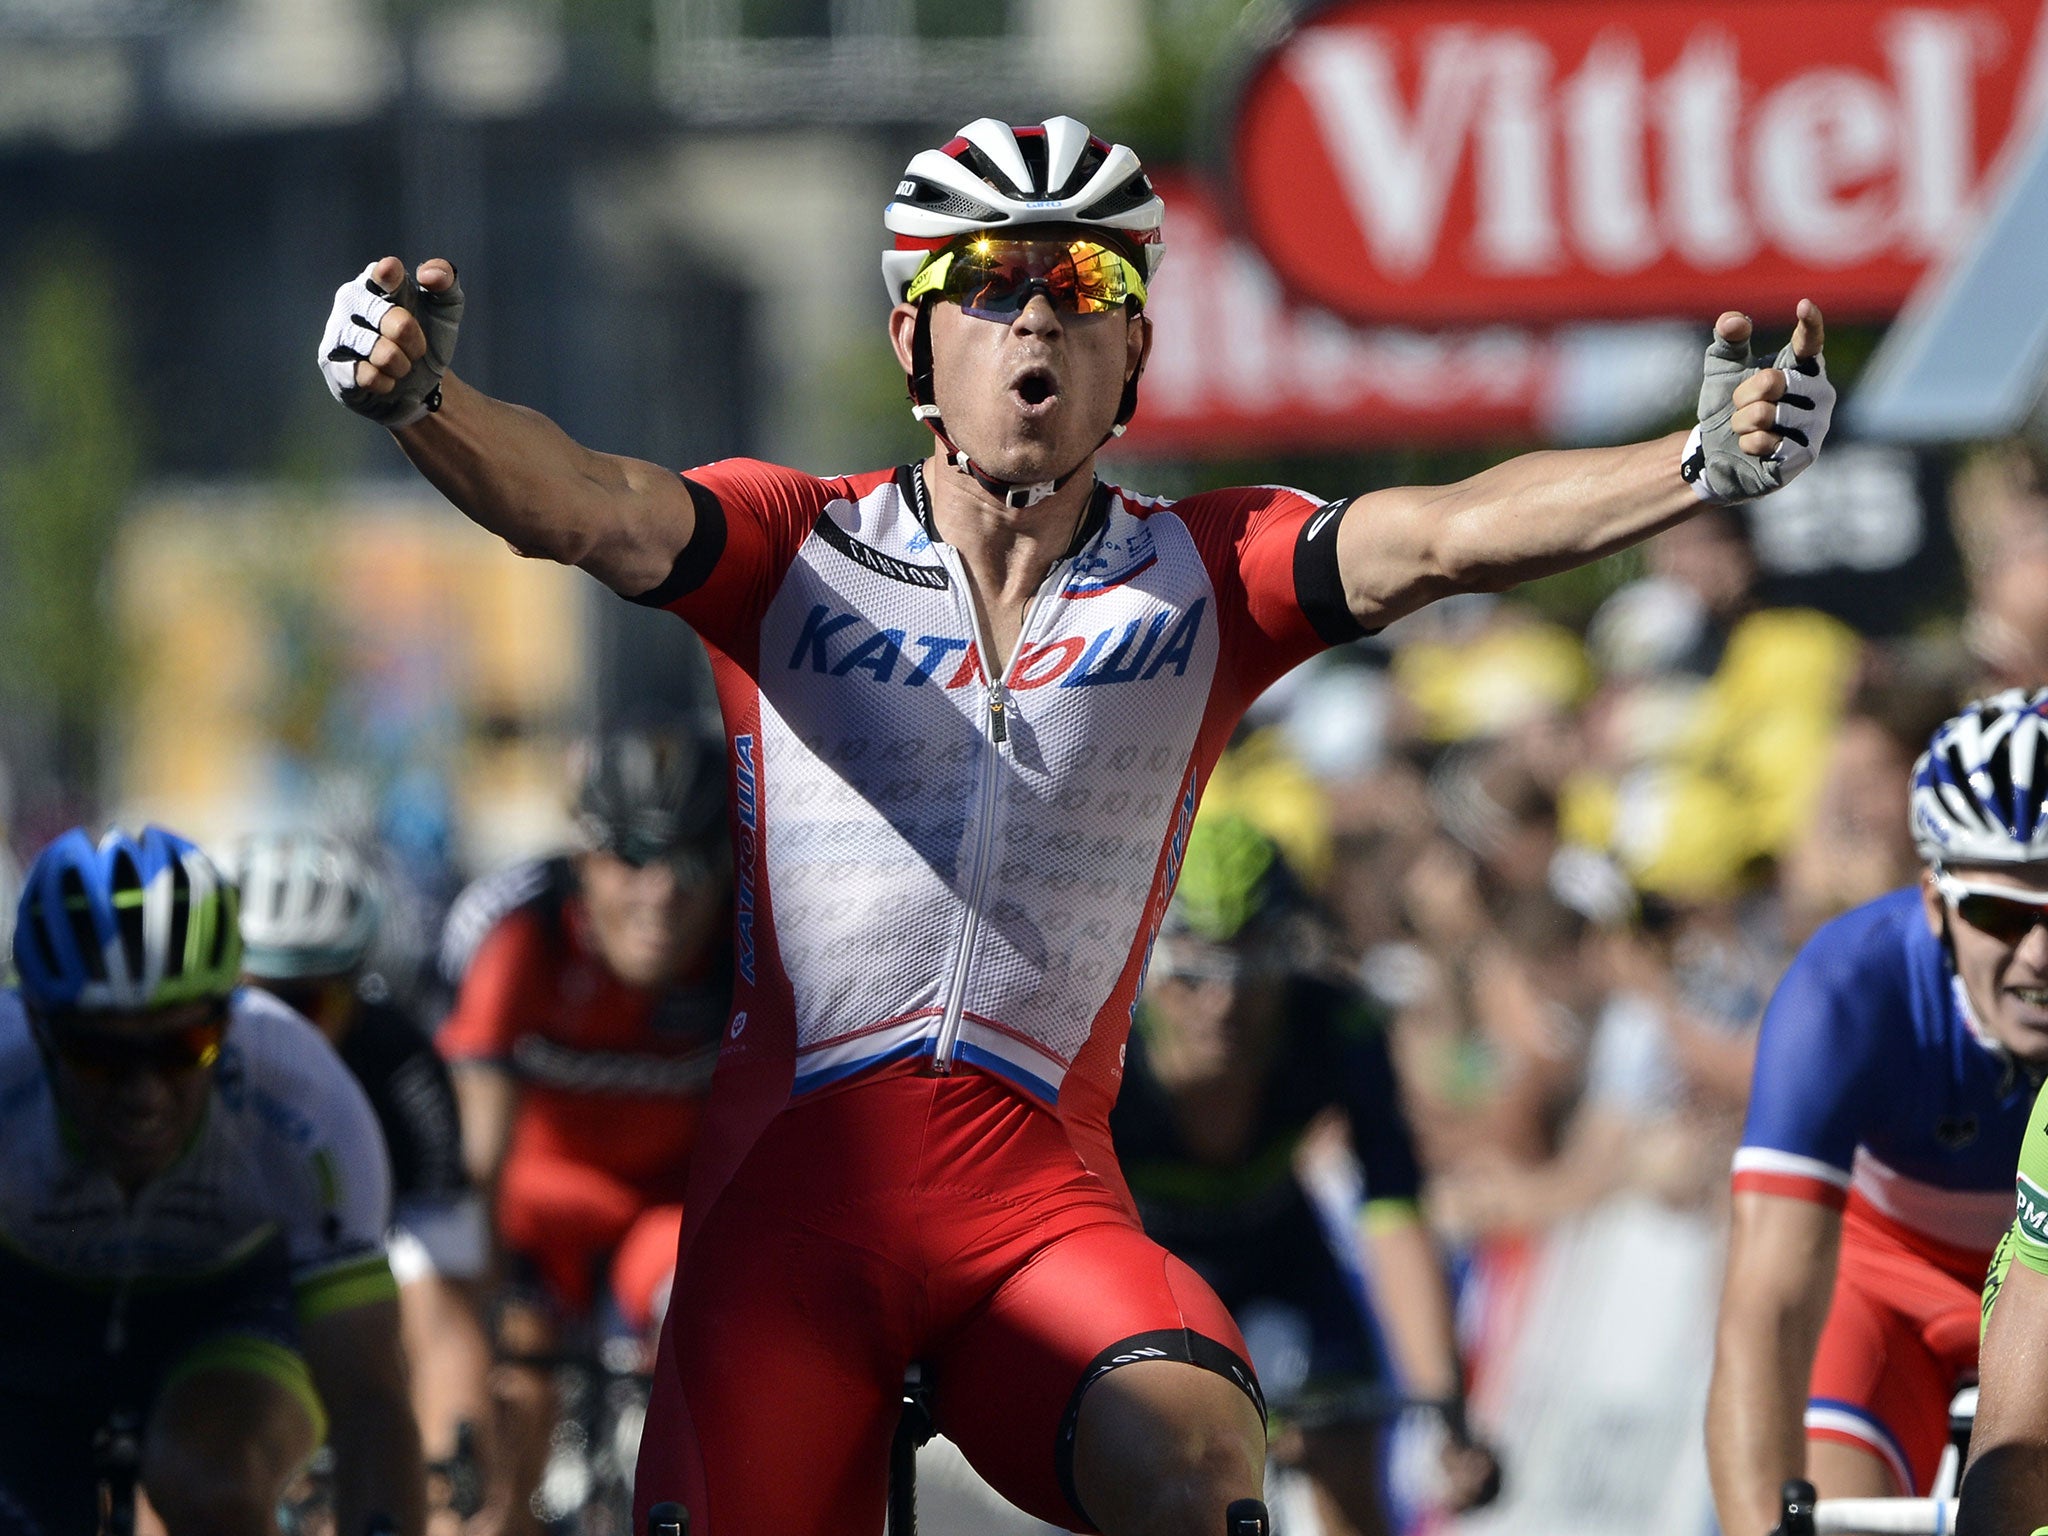 Norway's Alexander Kristoff (C) celebrates as he crosses the finish line at the end of the 185.5 km twelfth stage of the 101st edition of the Tour de France cycling race on July 17, 2014